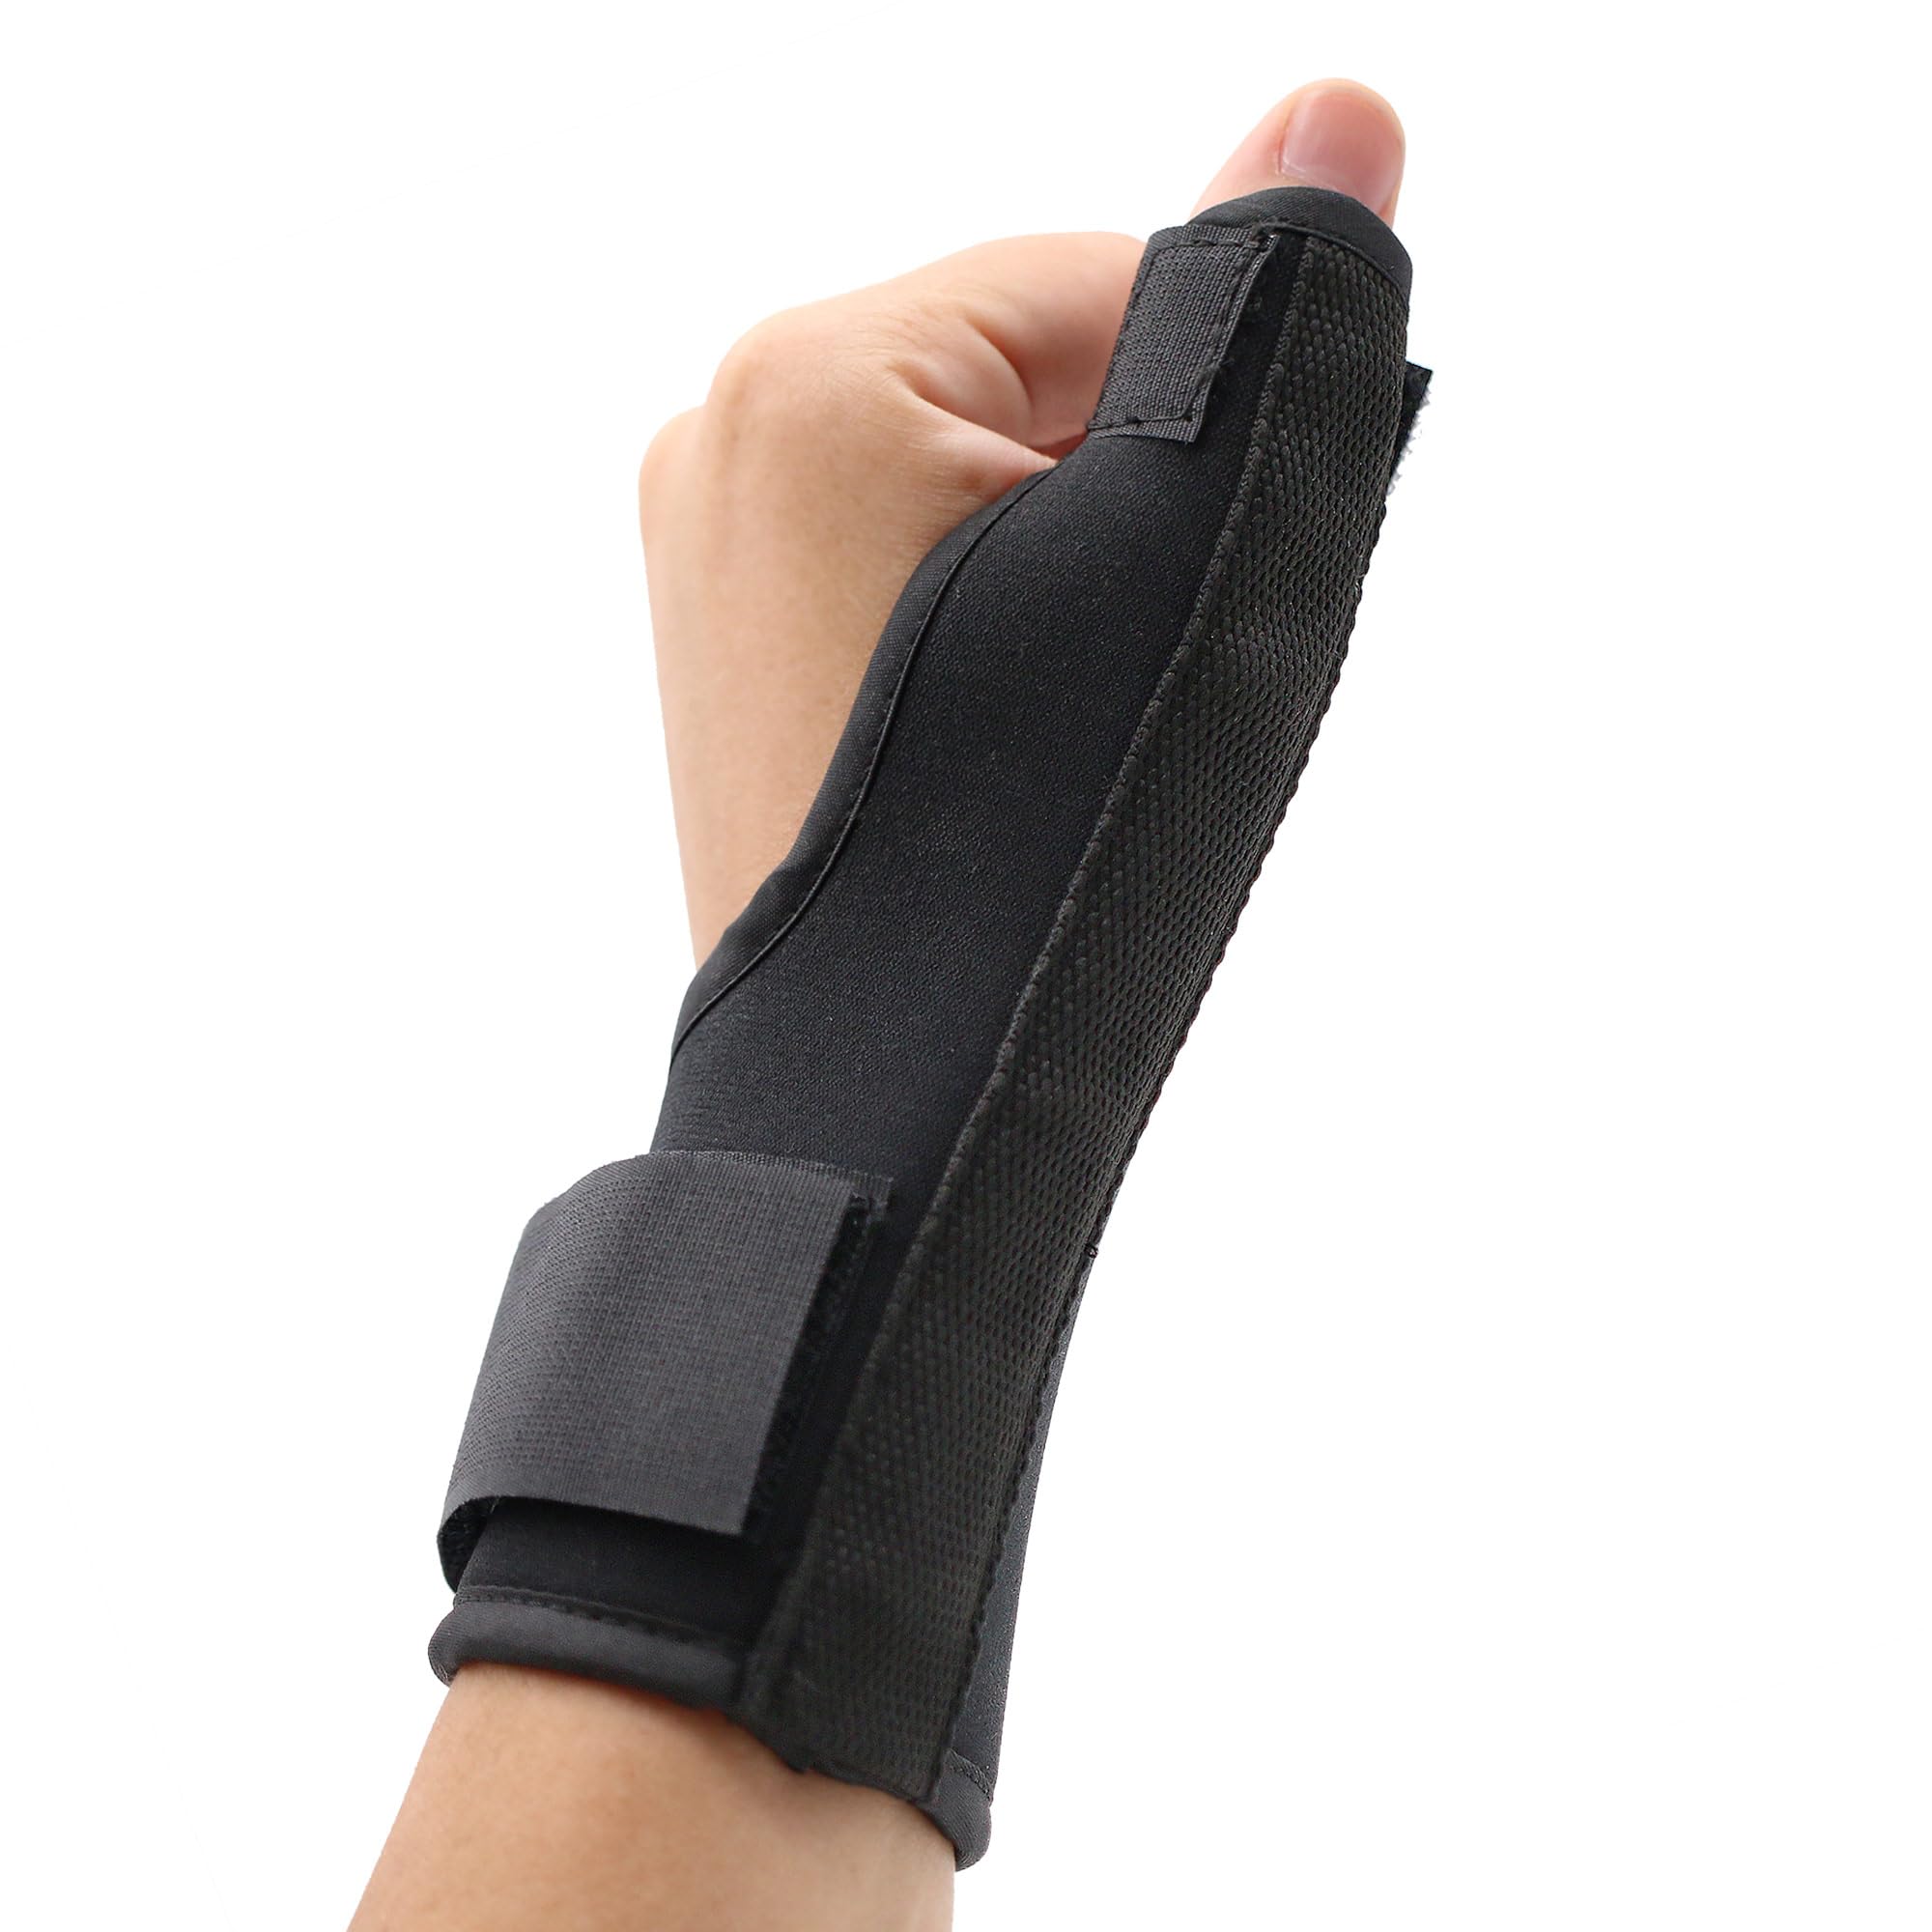 Heelbo Adjustable Thumb Brace & Wrist Strap, Fits Left or Right Wrist, FSA & HSA Eligible, Isolates and Stabilizes for Sprains, Fractures, Arthritis and Chronic Conditions